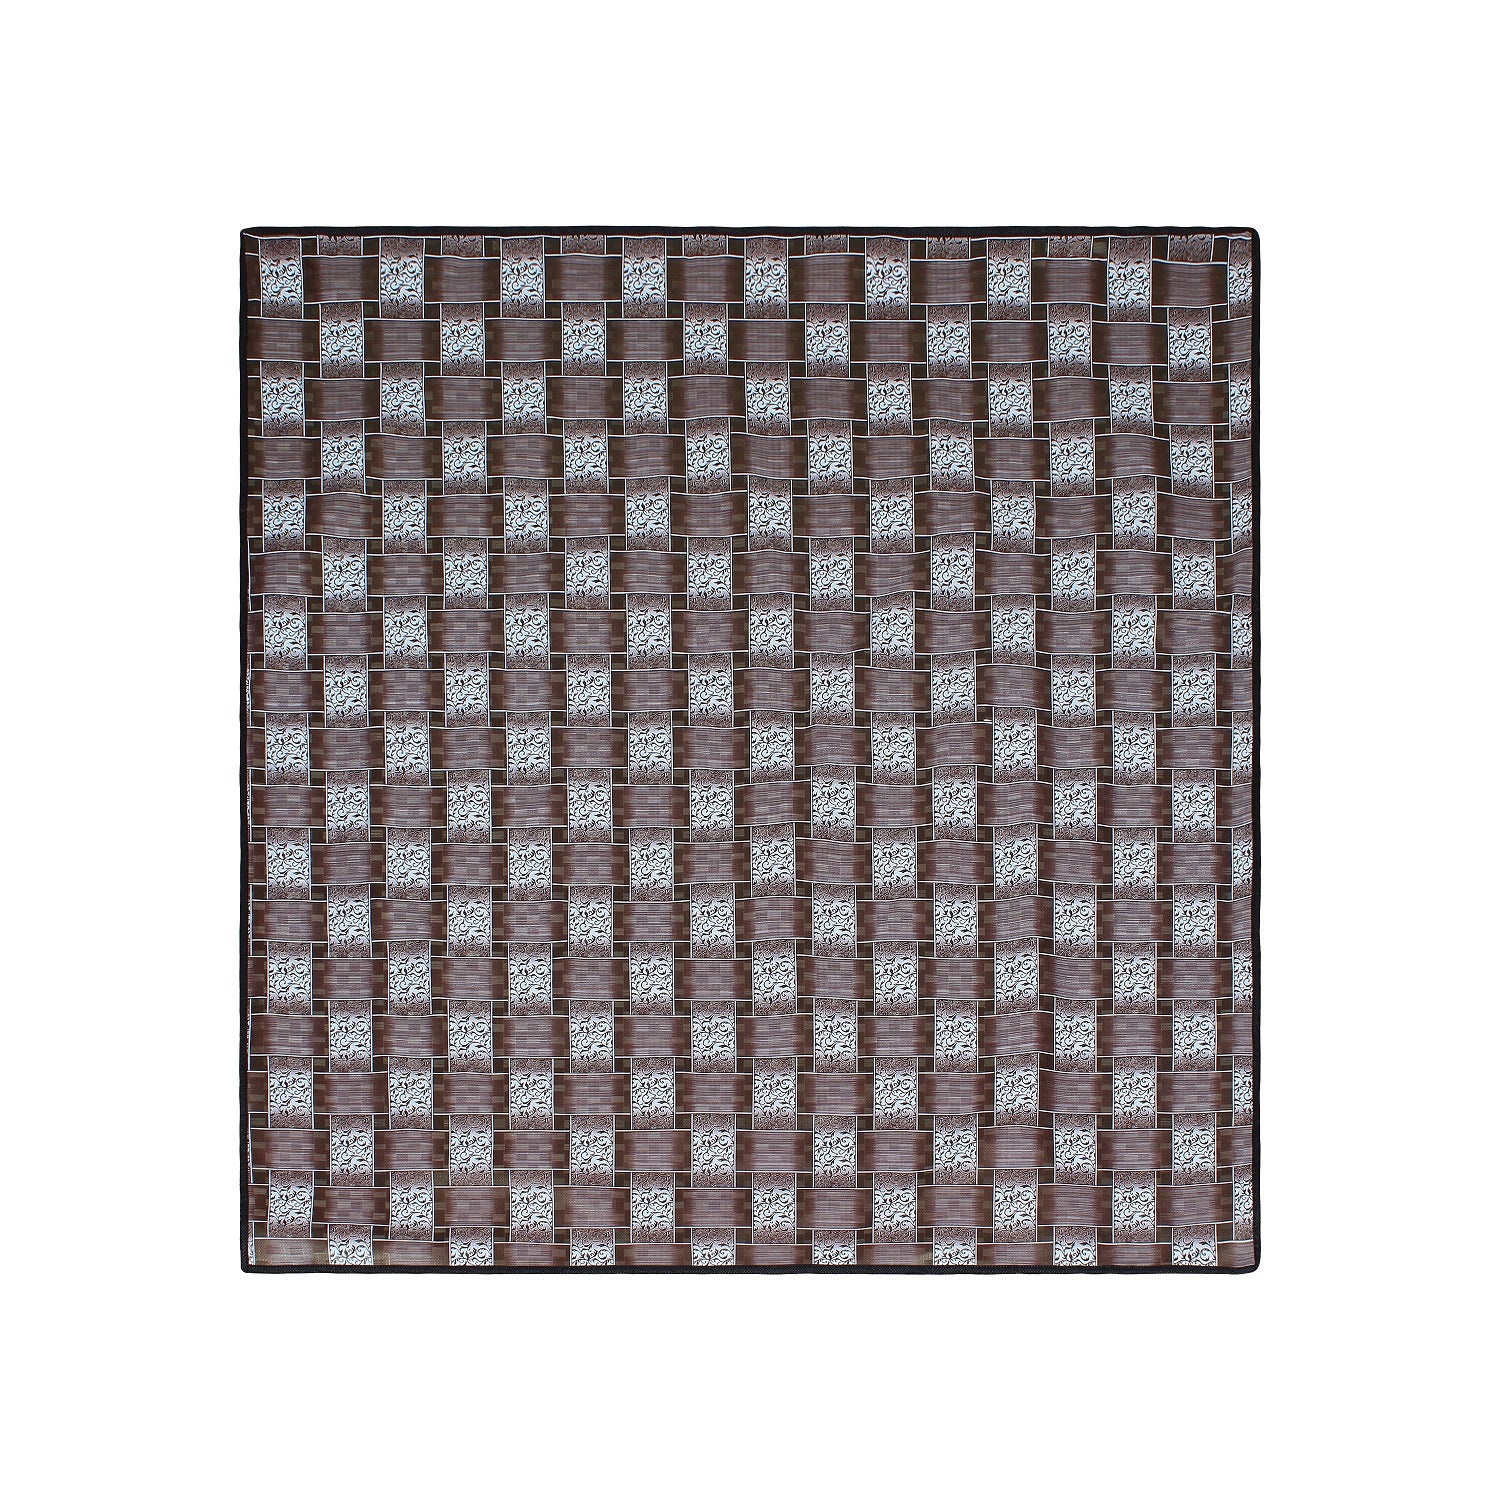 Waterproof & Oil Proof Bed Server Square Mat, SA41 - Dream Care Furnishings Private Limited